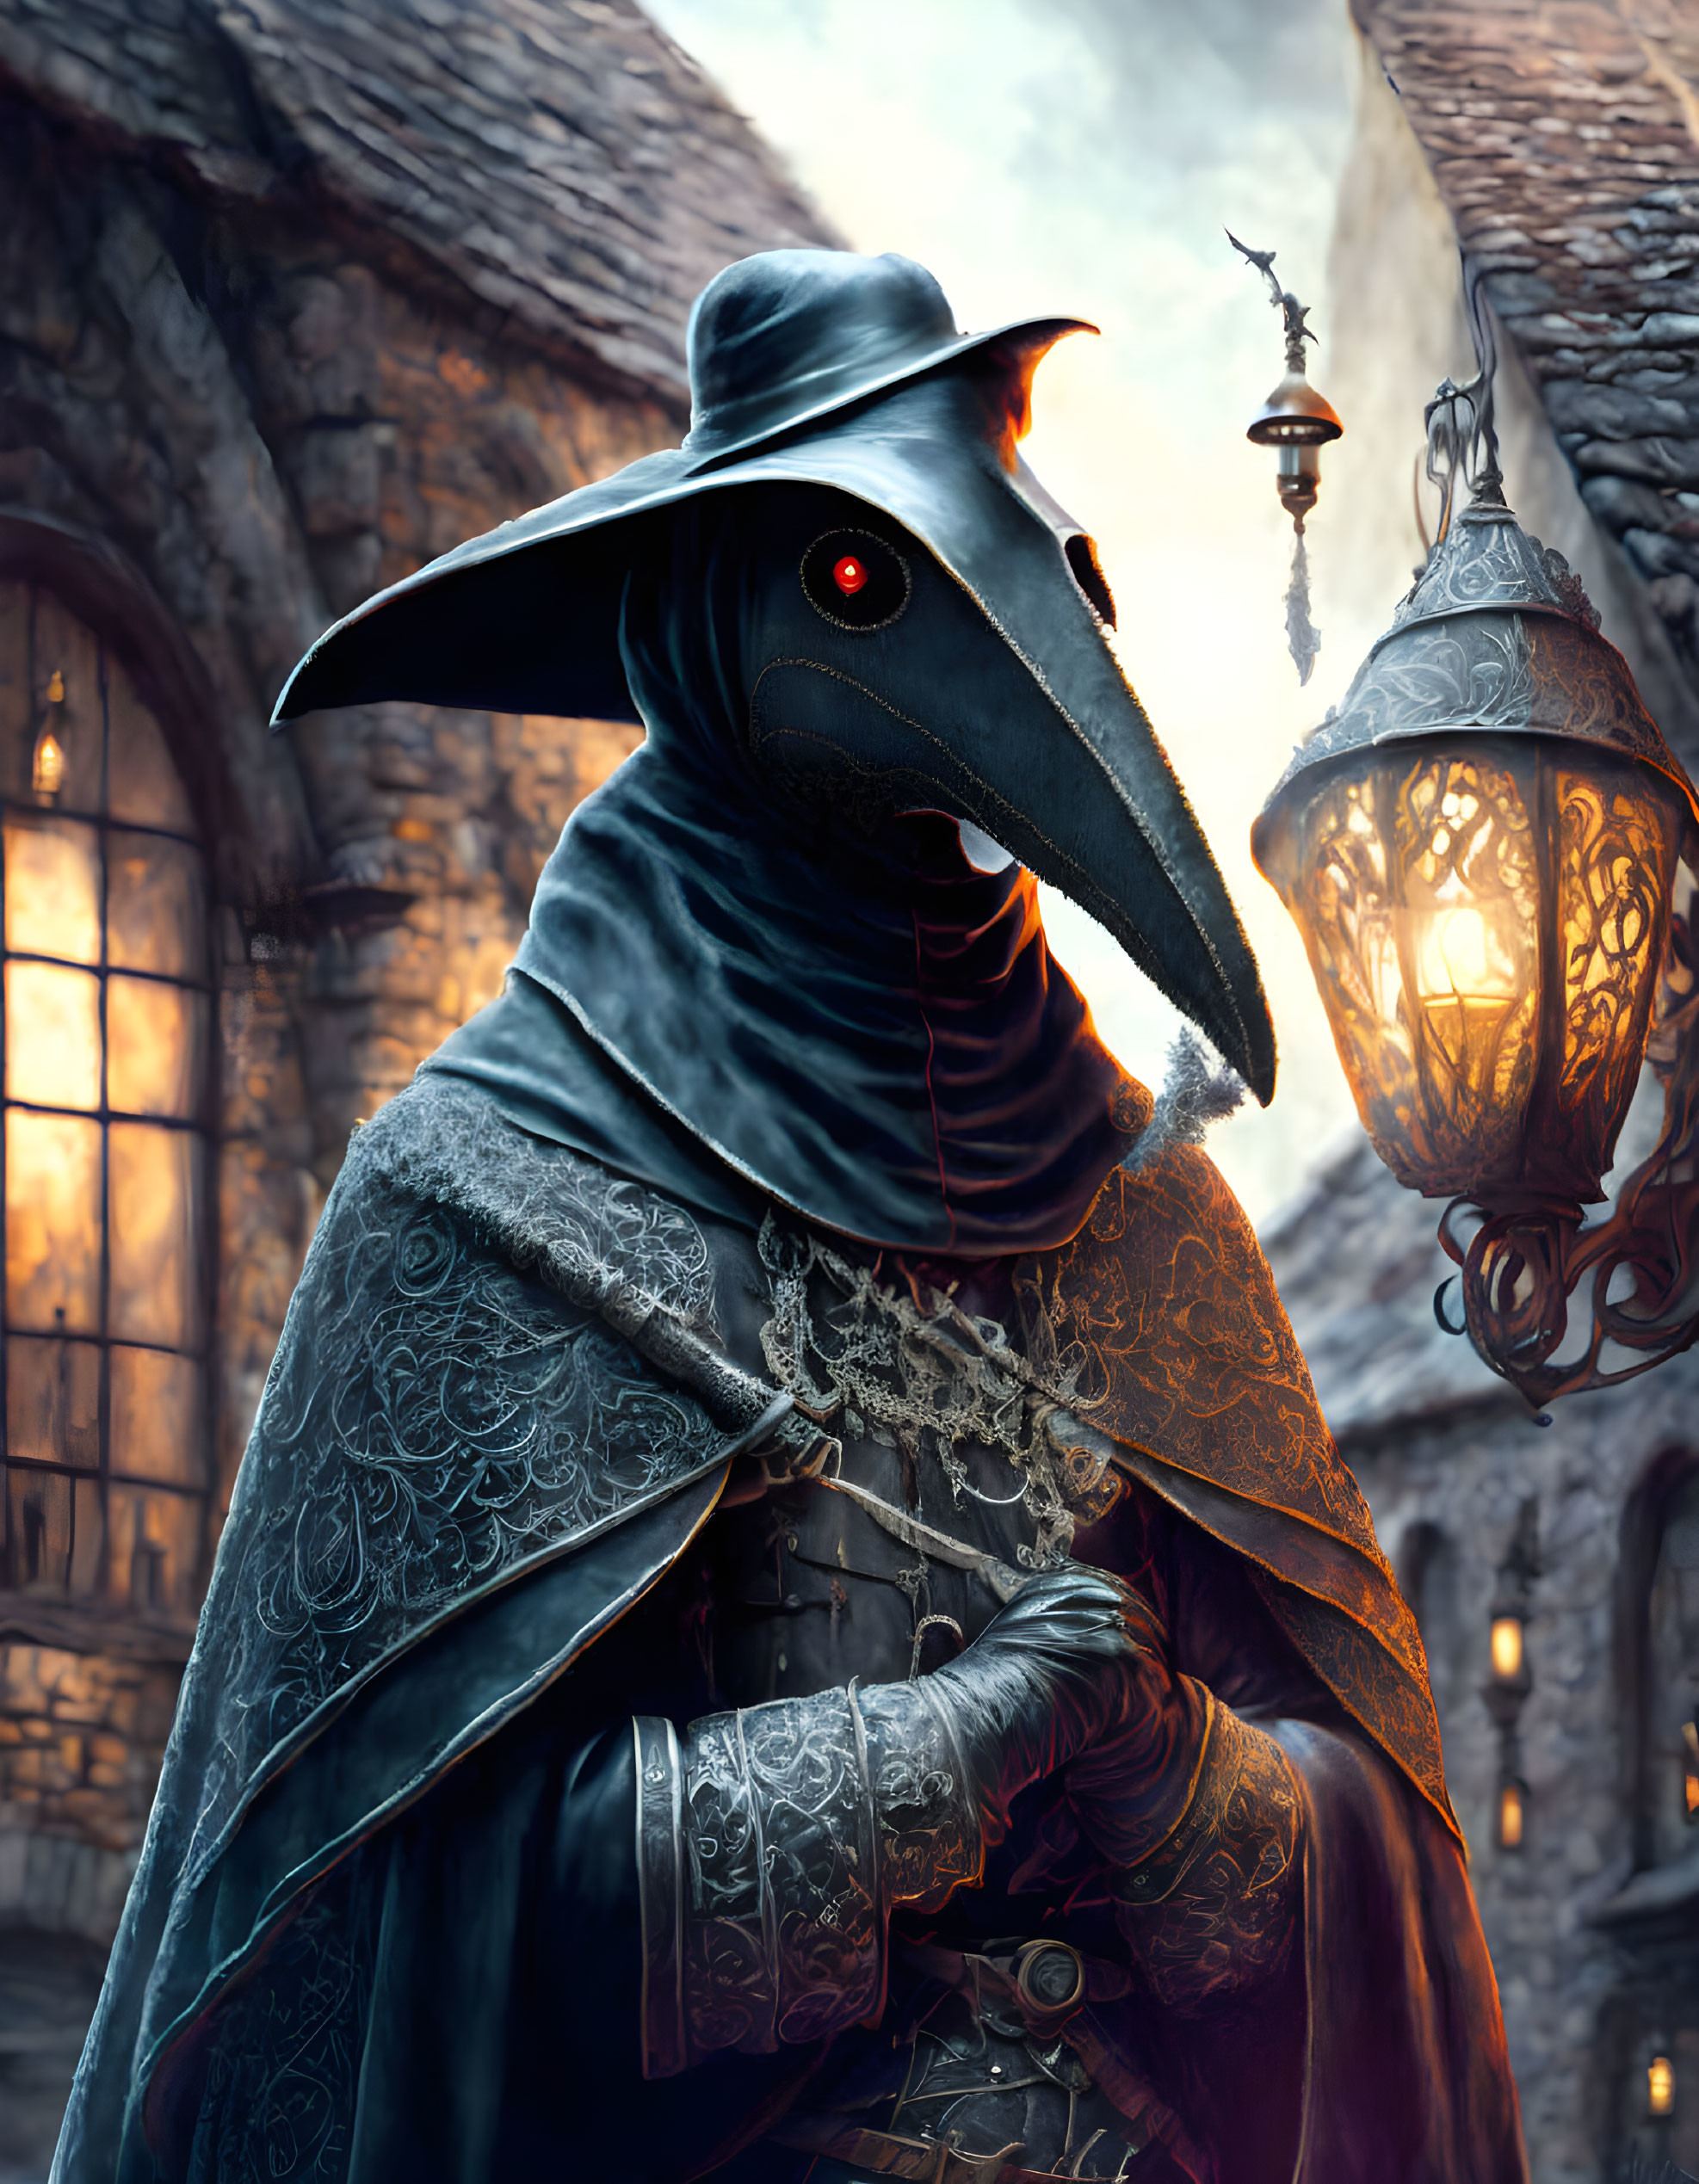 Plague doctor in beaked mask and cloak in dimly lit alley